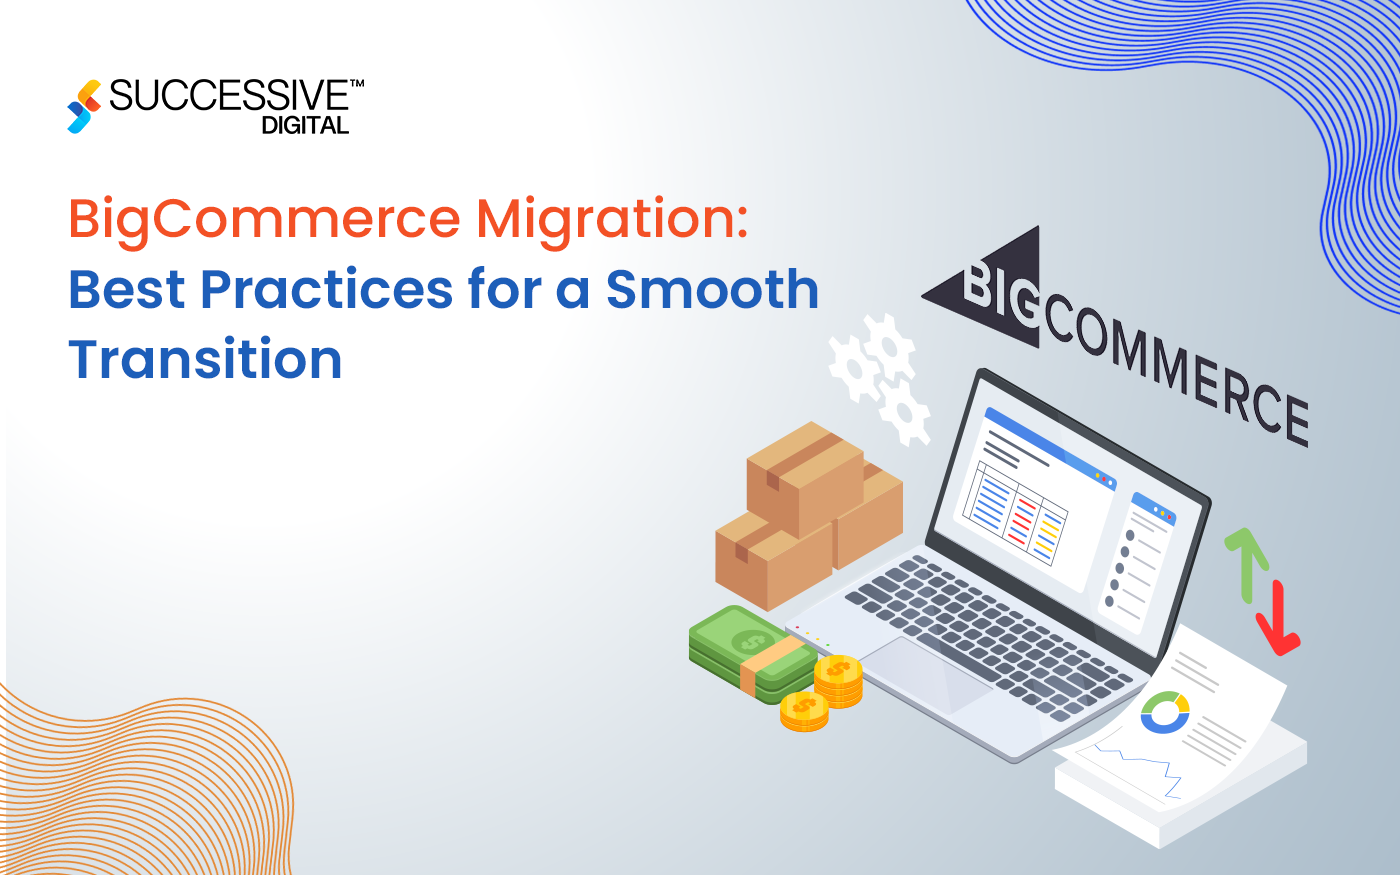 BigCommerce Migration: Best Practices for a Smooth Transition